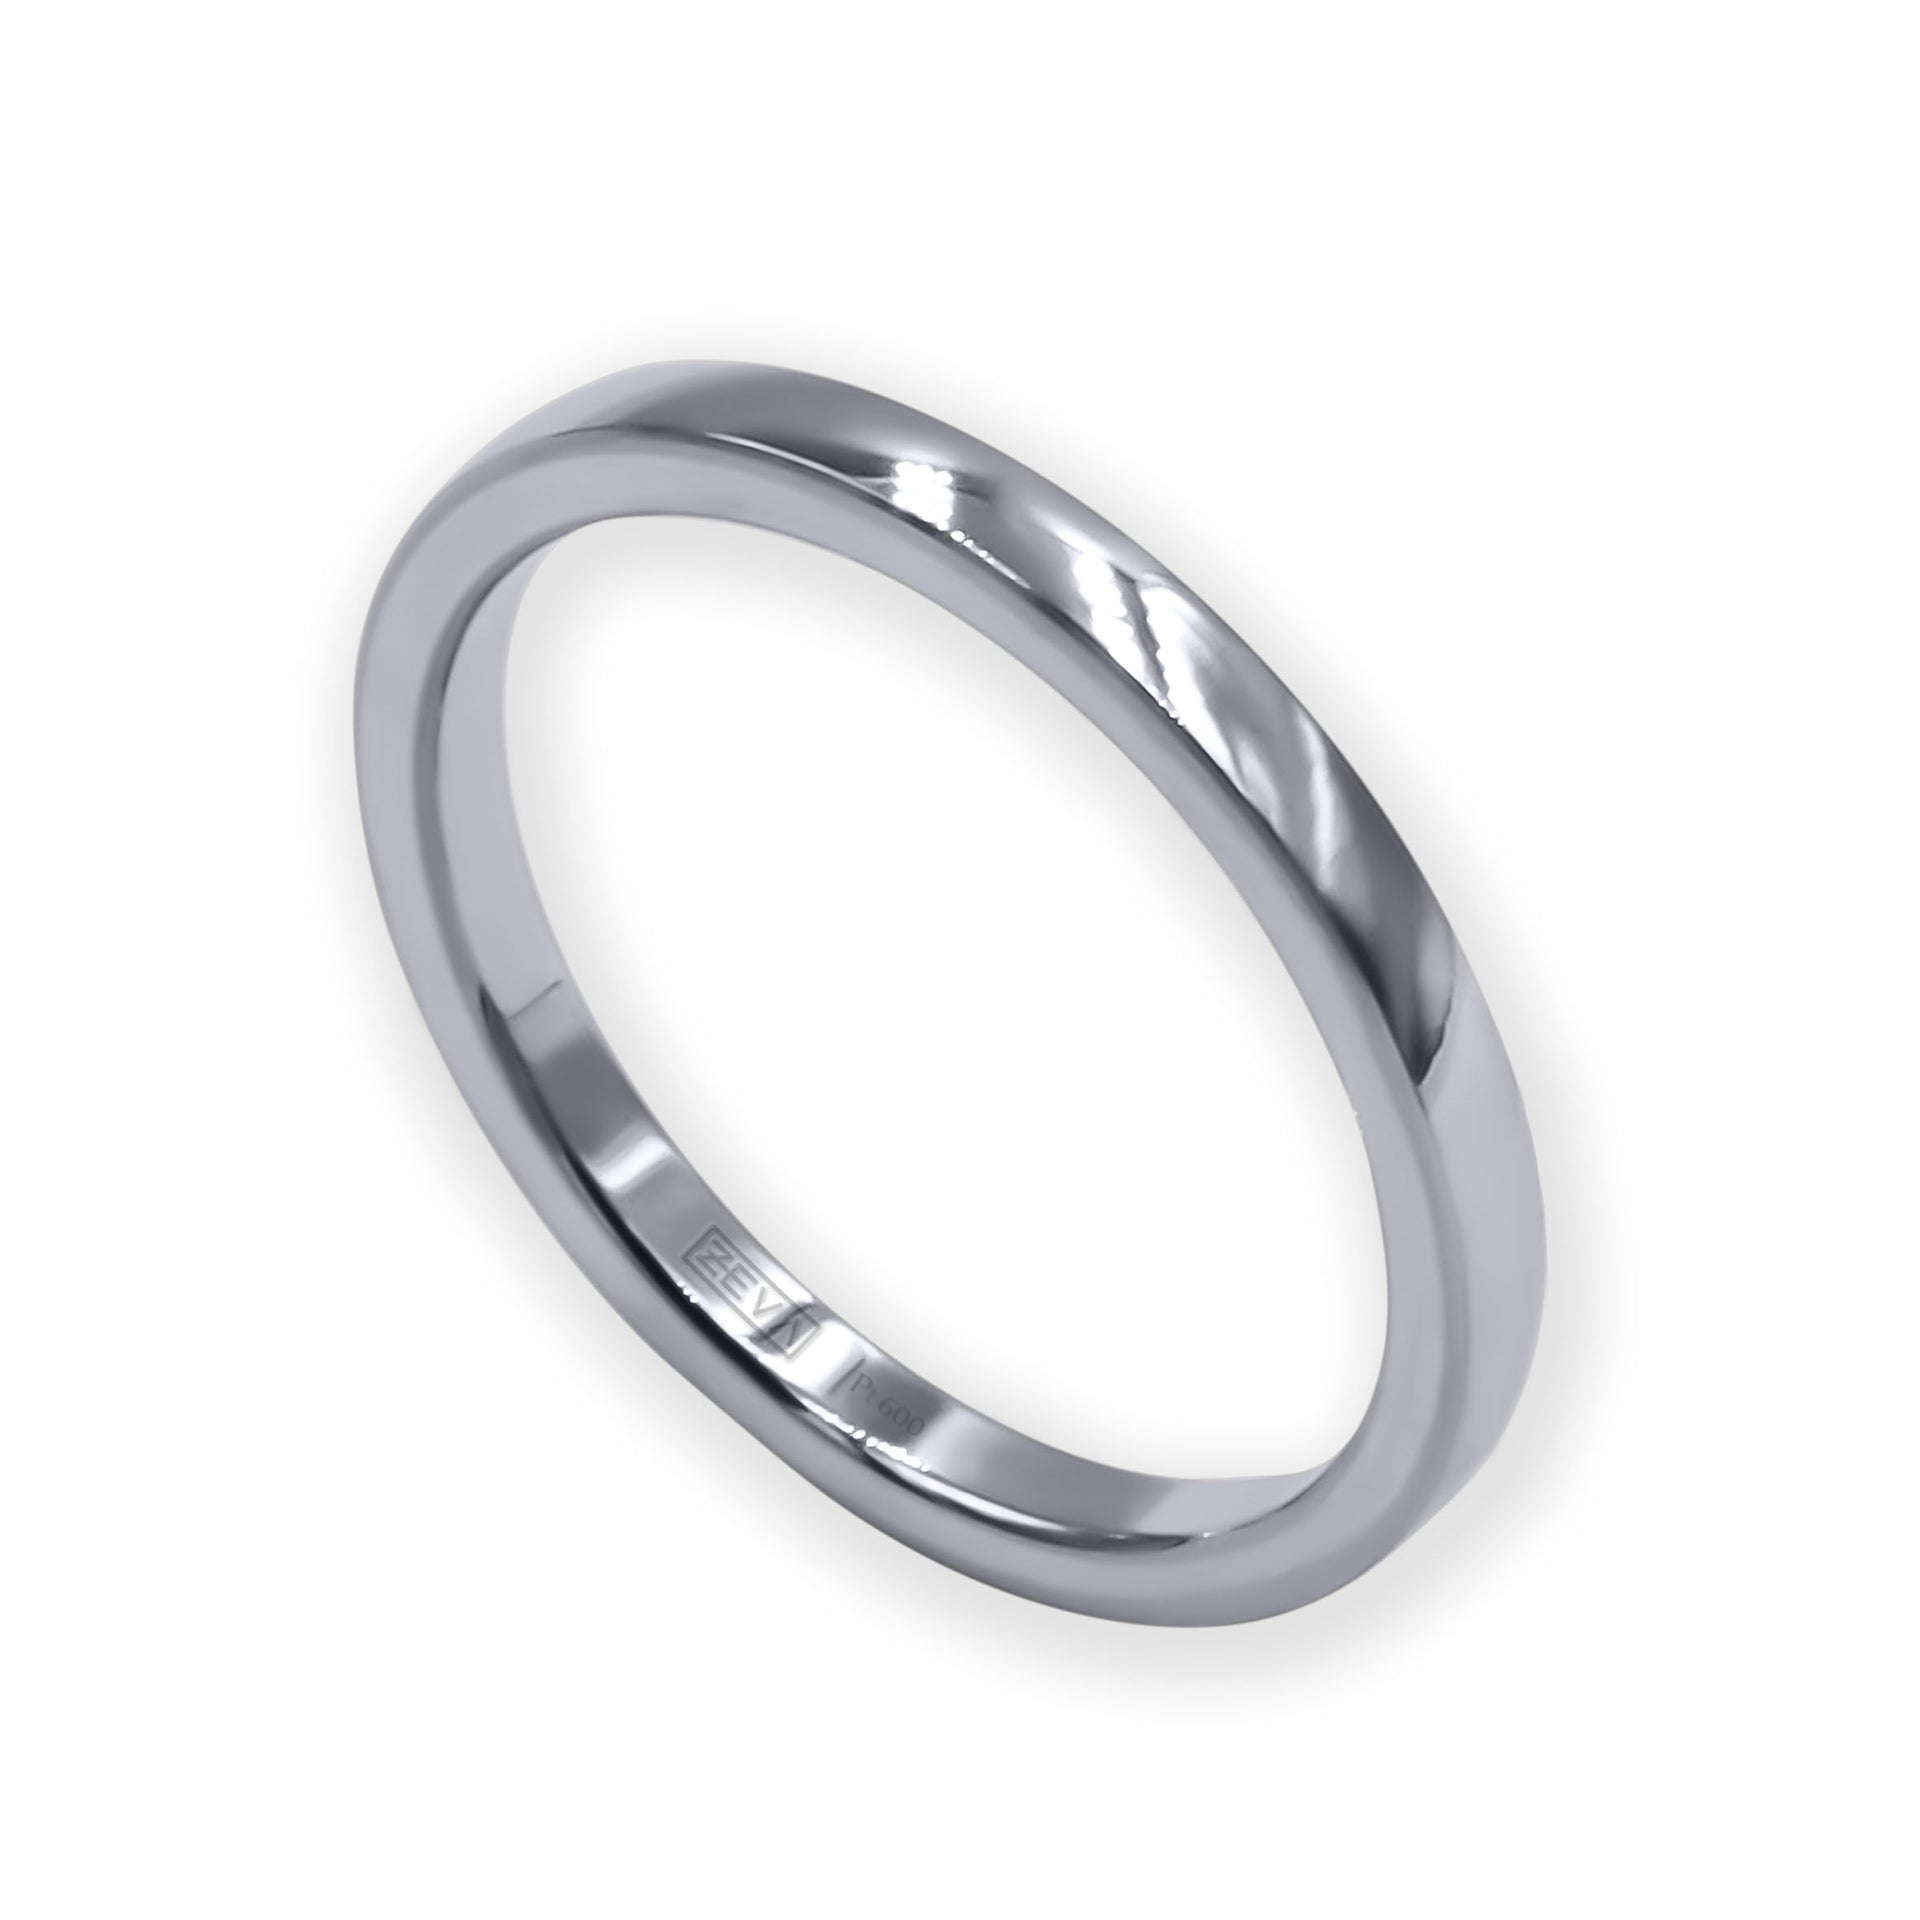 Ring EARTH IS ROUND 2mm round profile platinum 600